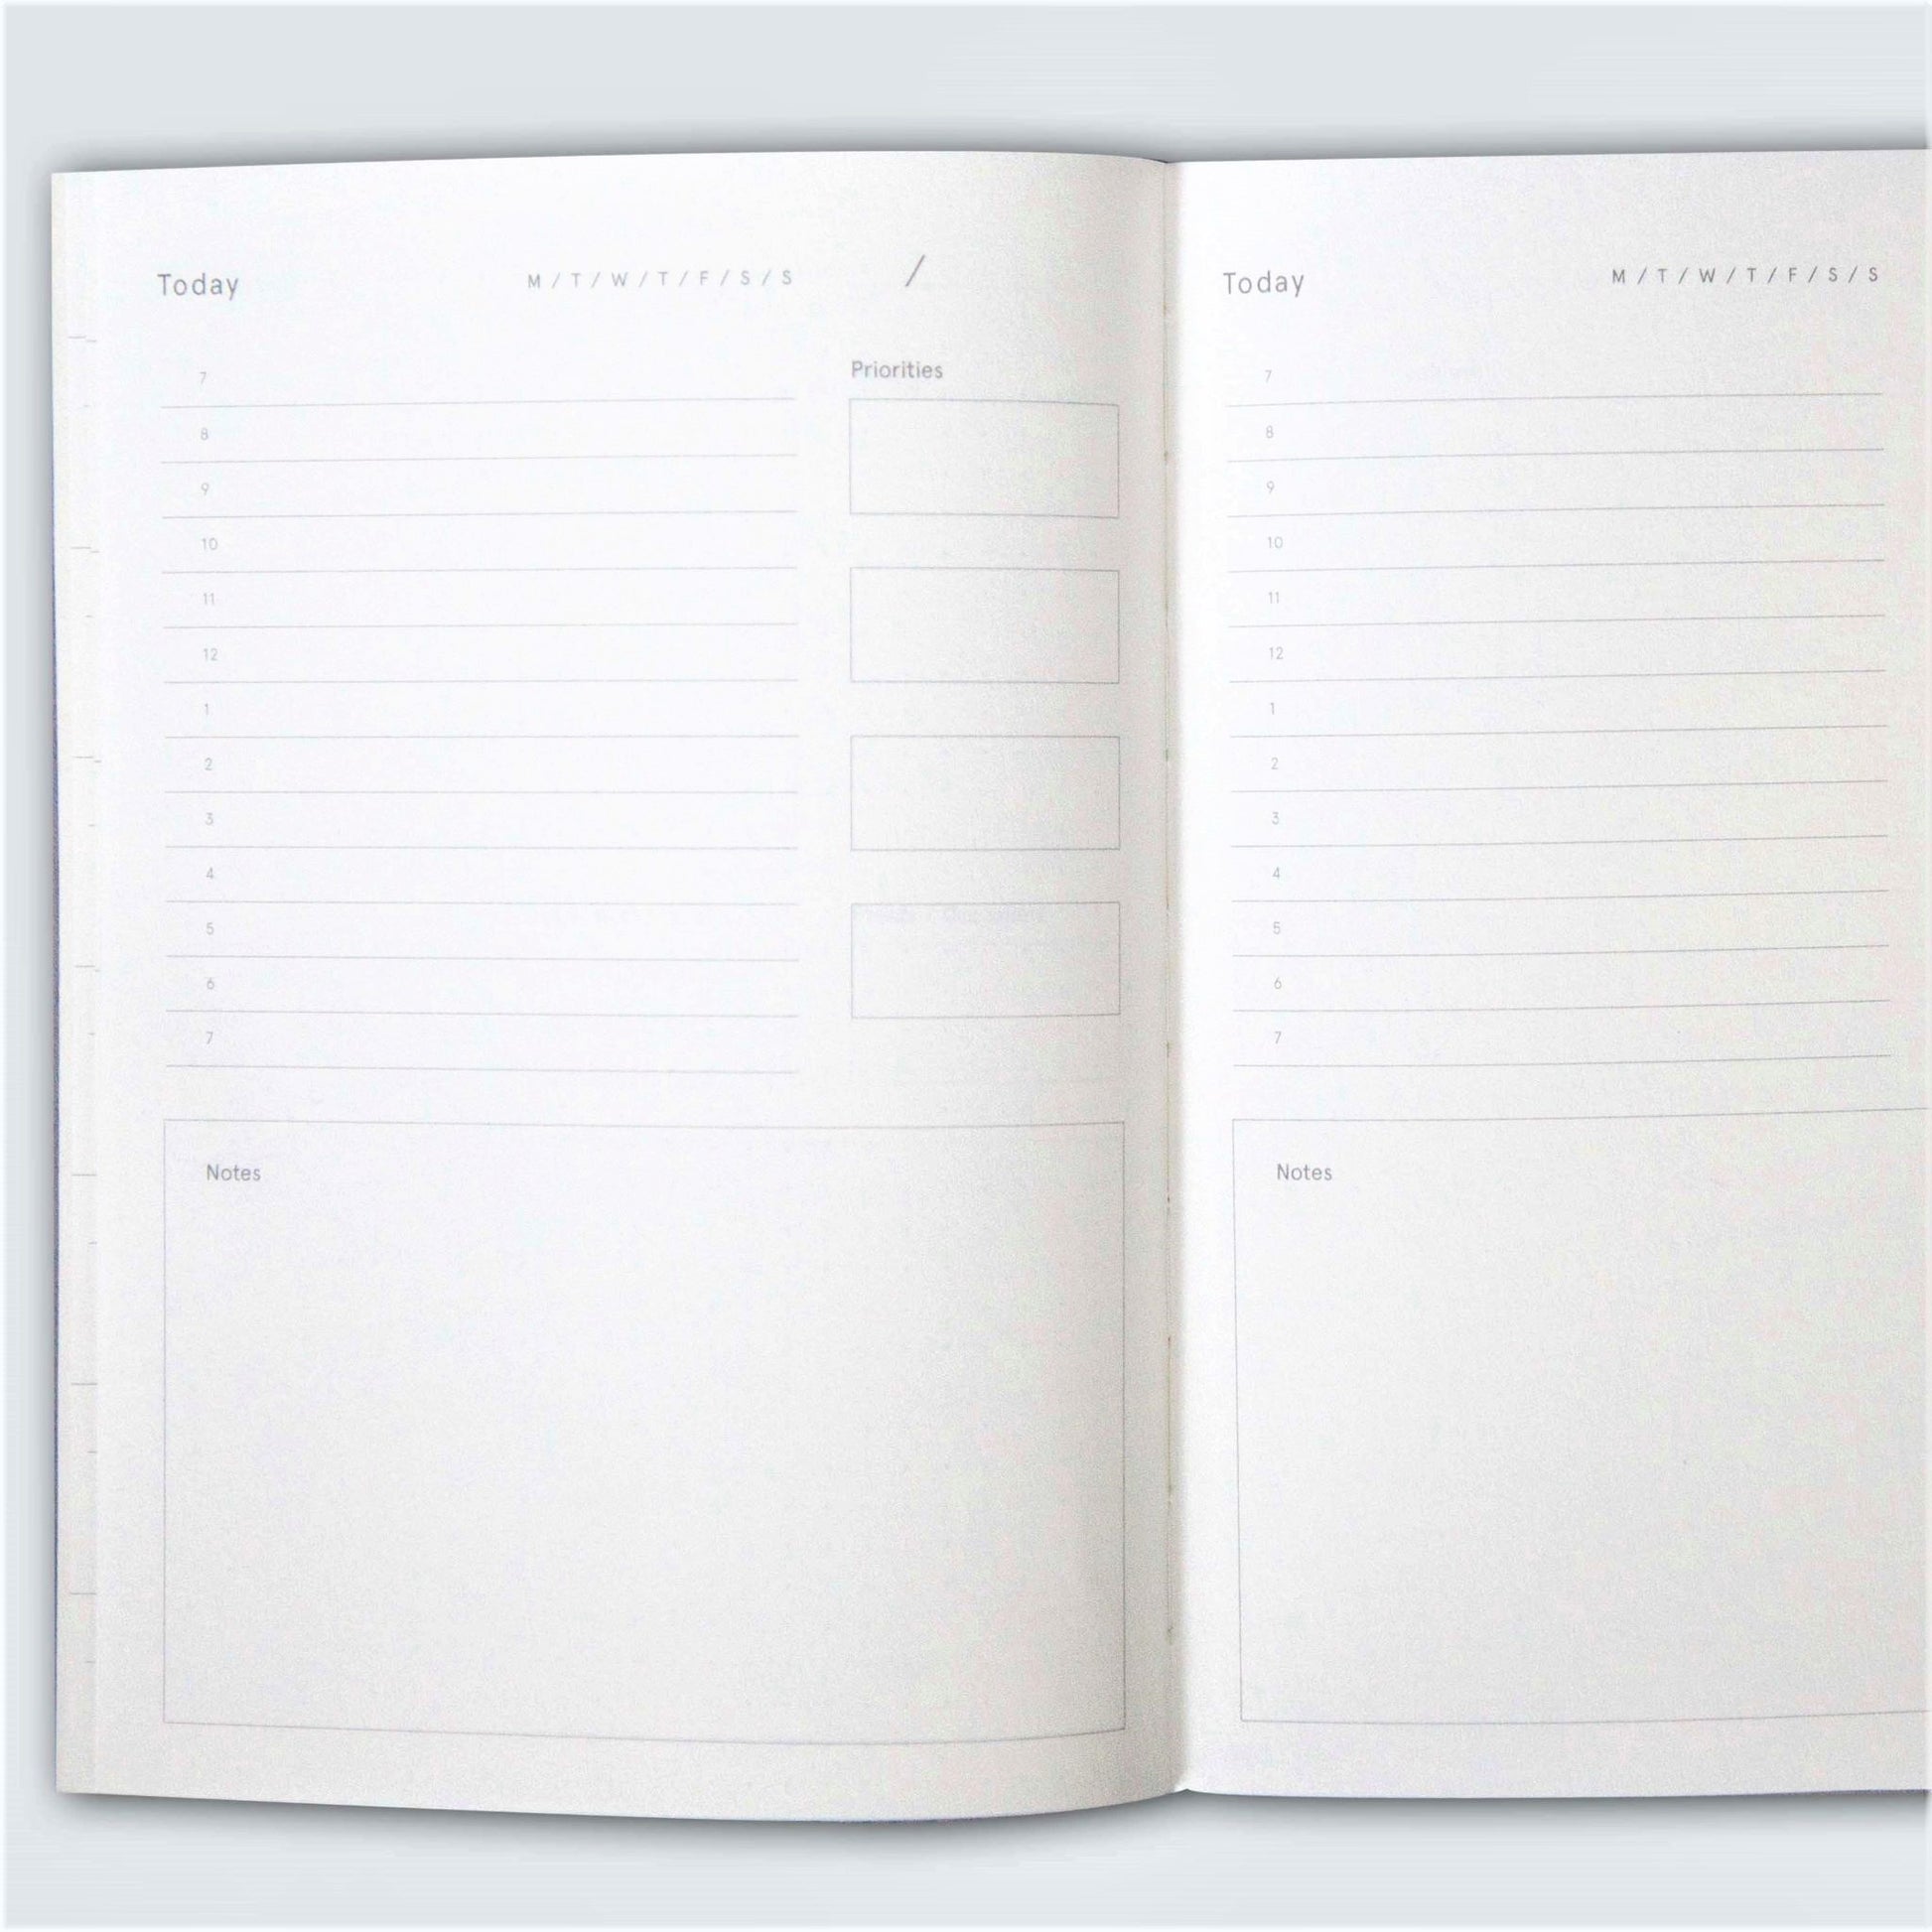 A5 softback 12 week daily planner, pictured open to show the daily planner layout